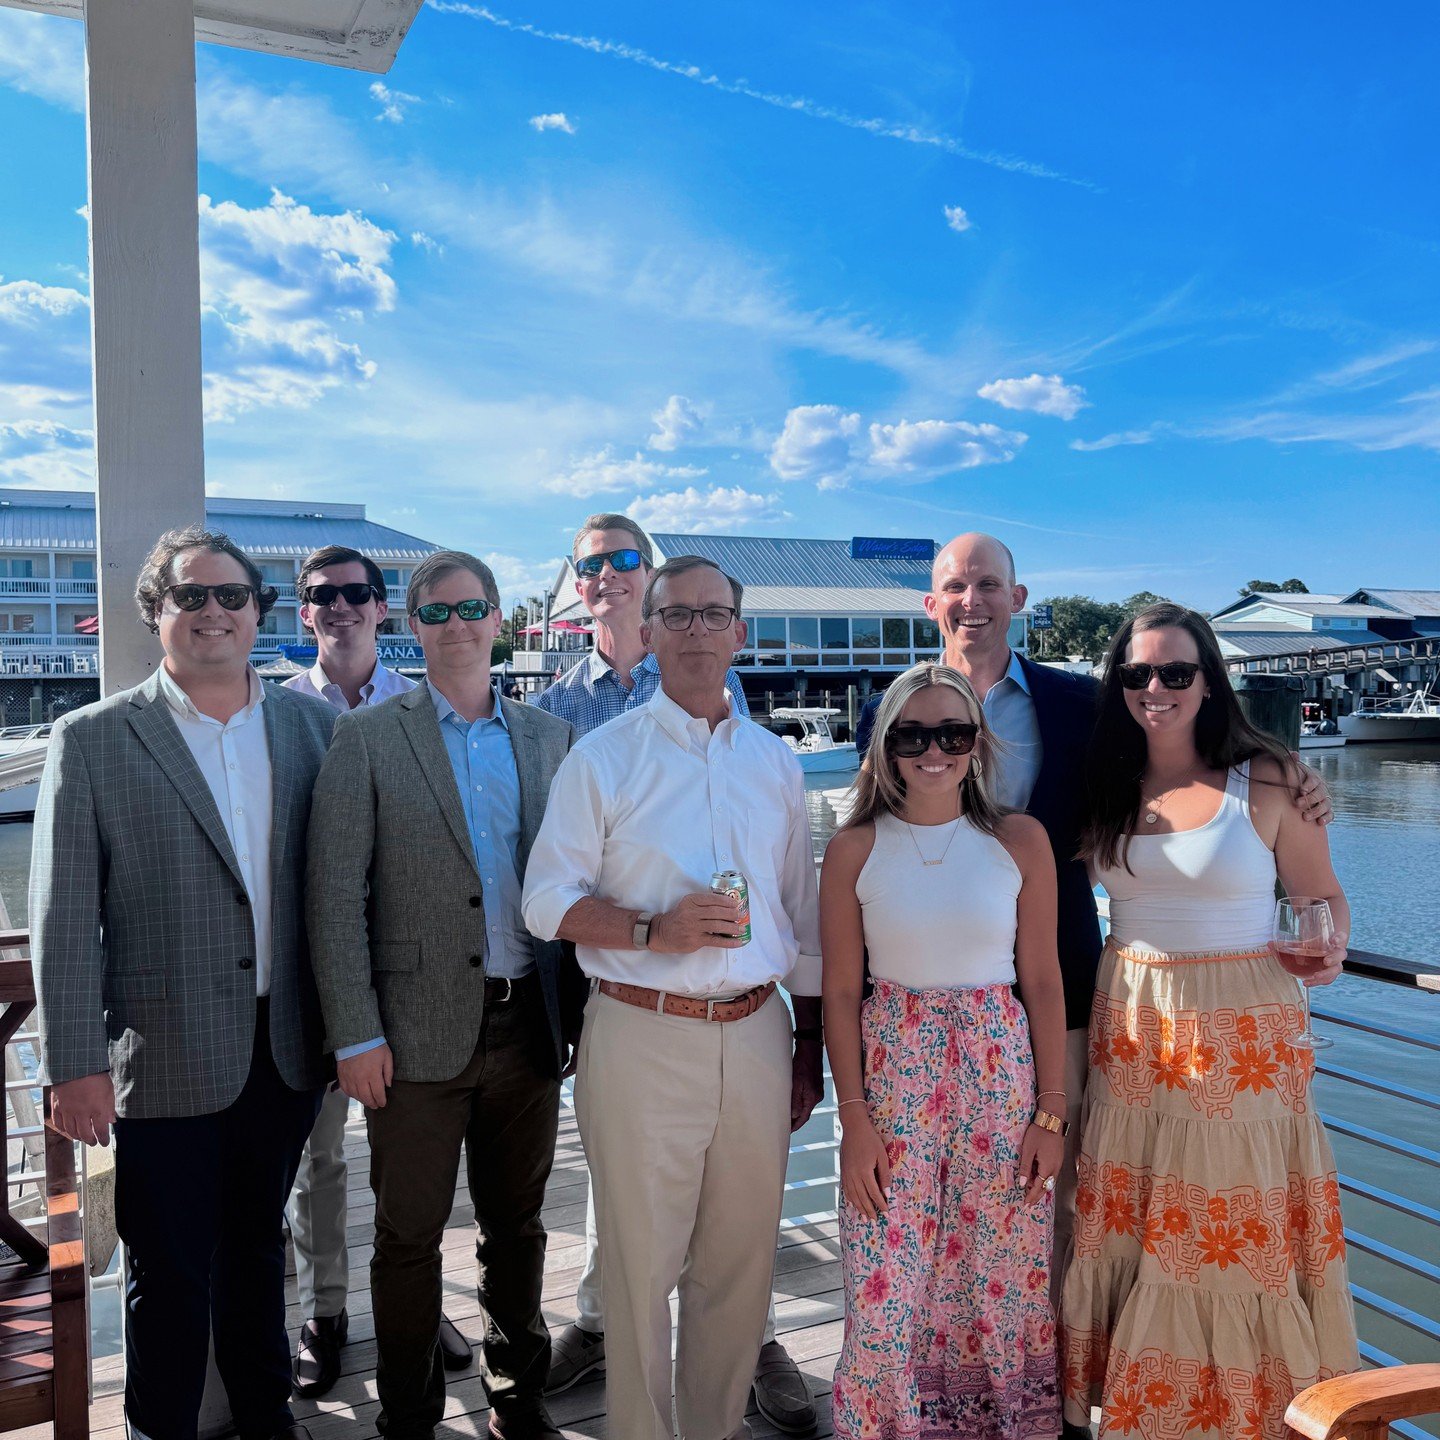 No better way to celebrate Warehouse Wednesday than a Port 95 party!

Our On Cloud 95 party at Sunset's last night was a success! Swipe to see our first Port 95 event in 2022!

#bridgecommercial #southcarolina #industrialpark #businesspark #forlease 